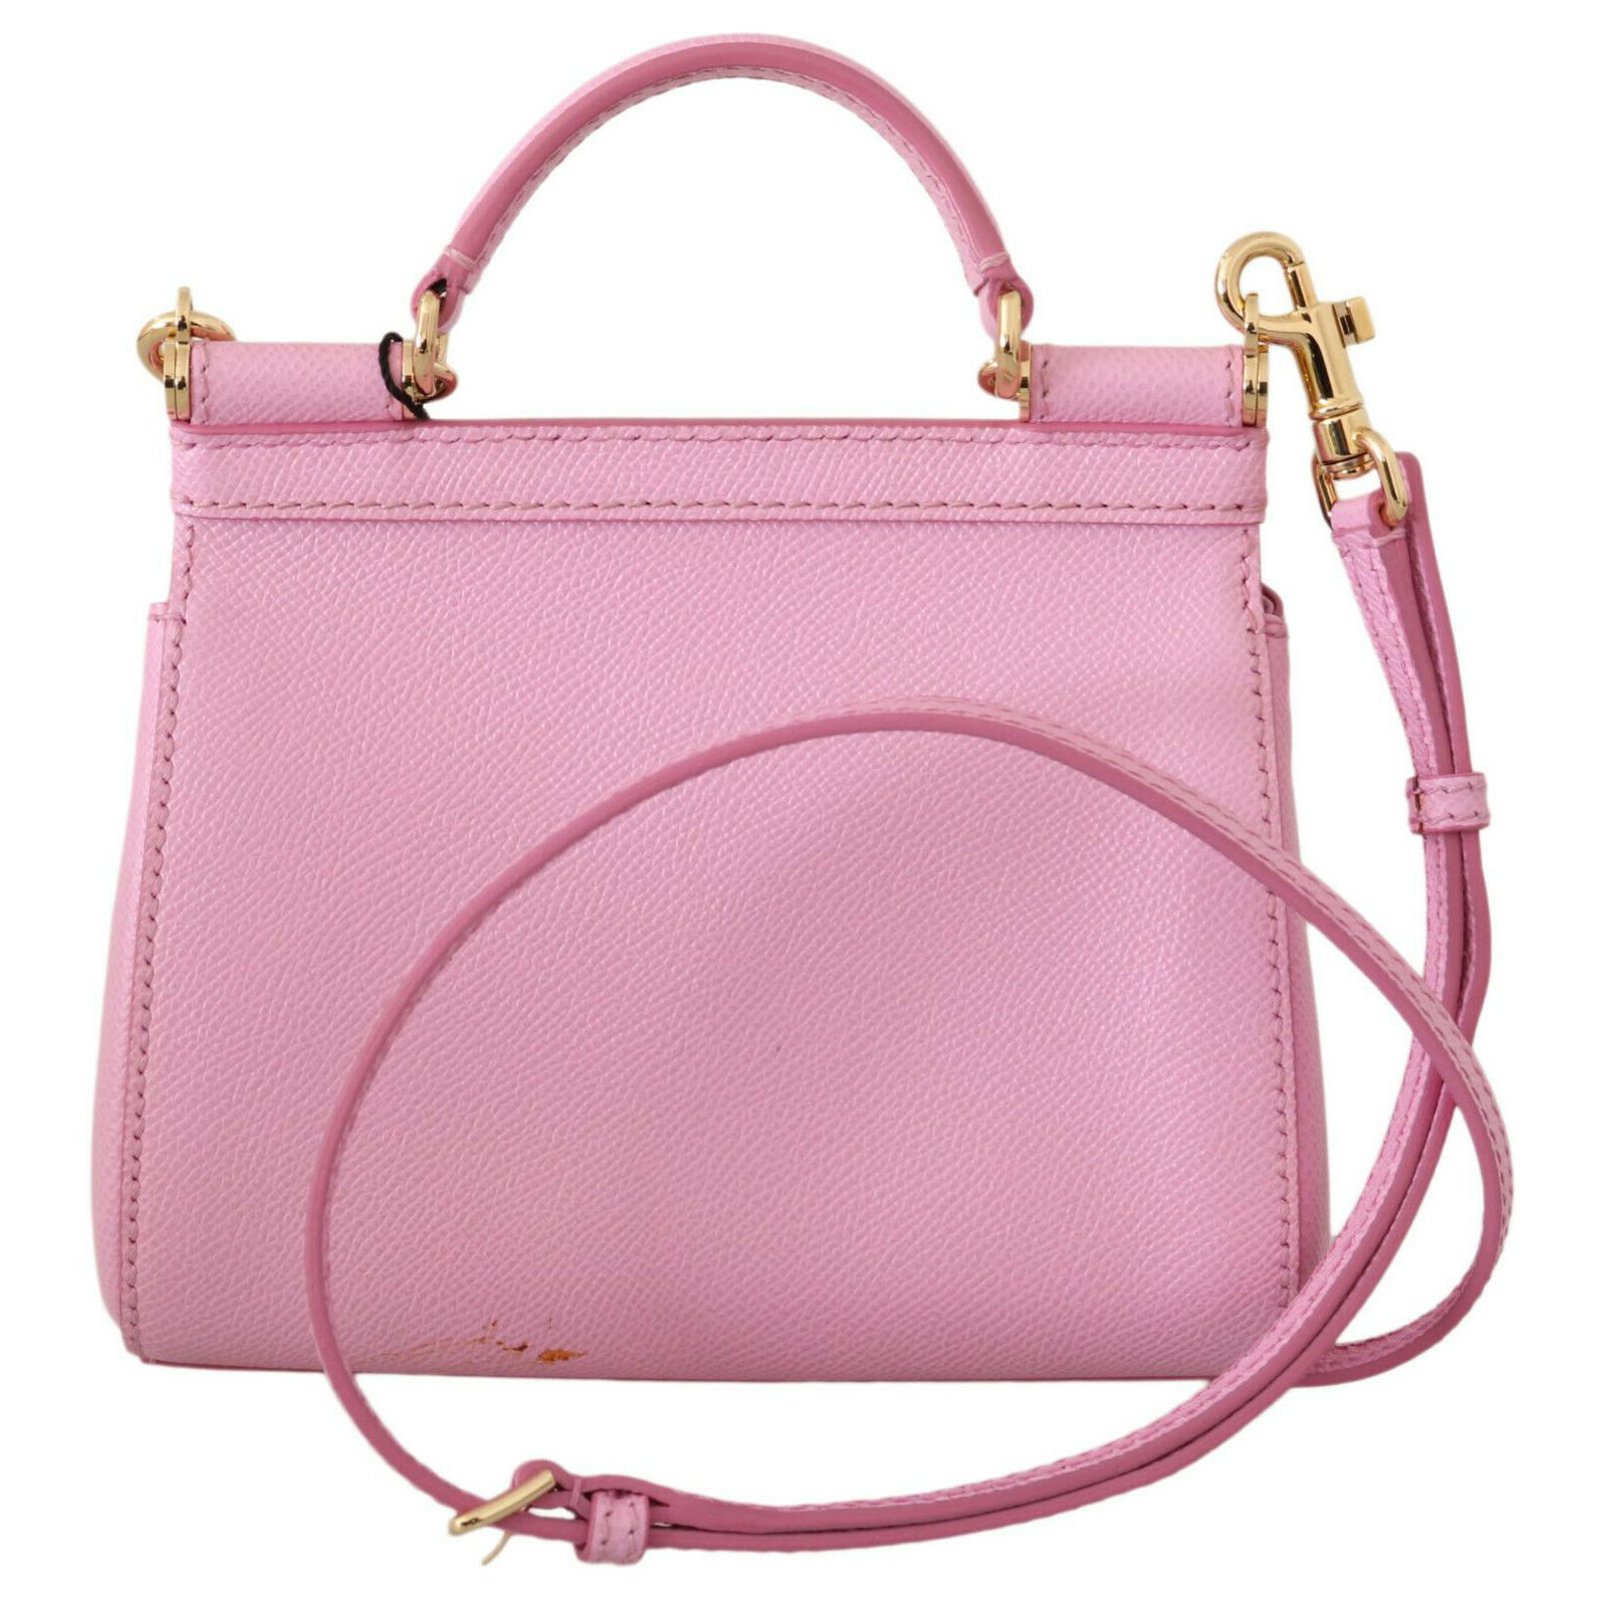 DOLCE & GABBANA Bag Purse MISS SICILY Pink Dauphine Leather Hand